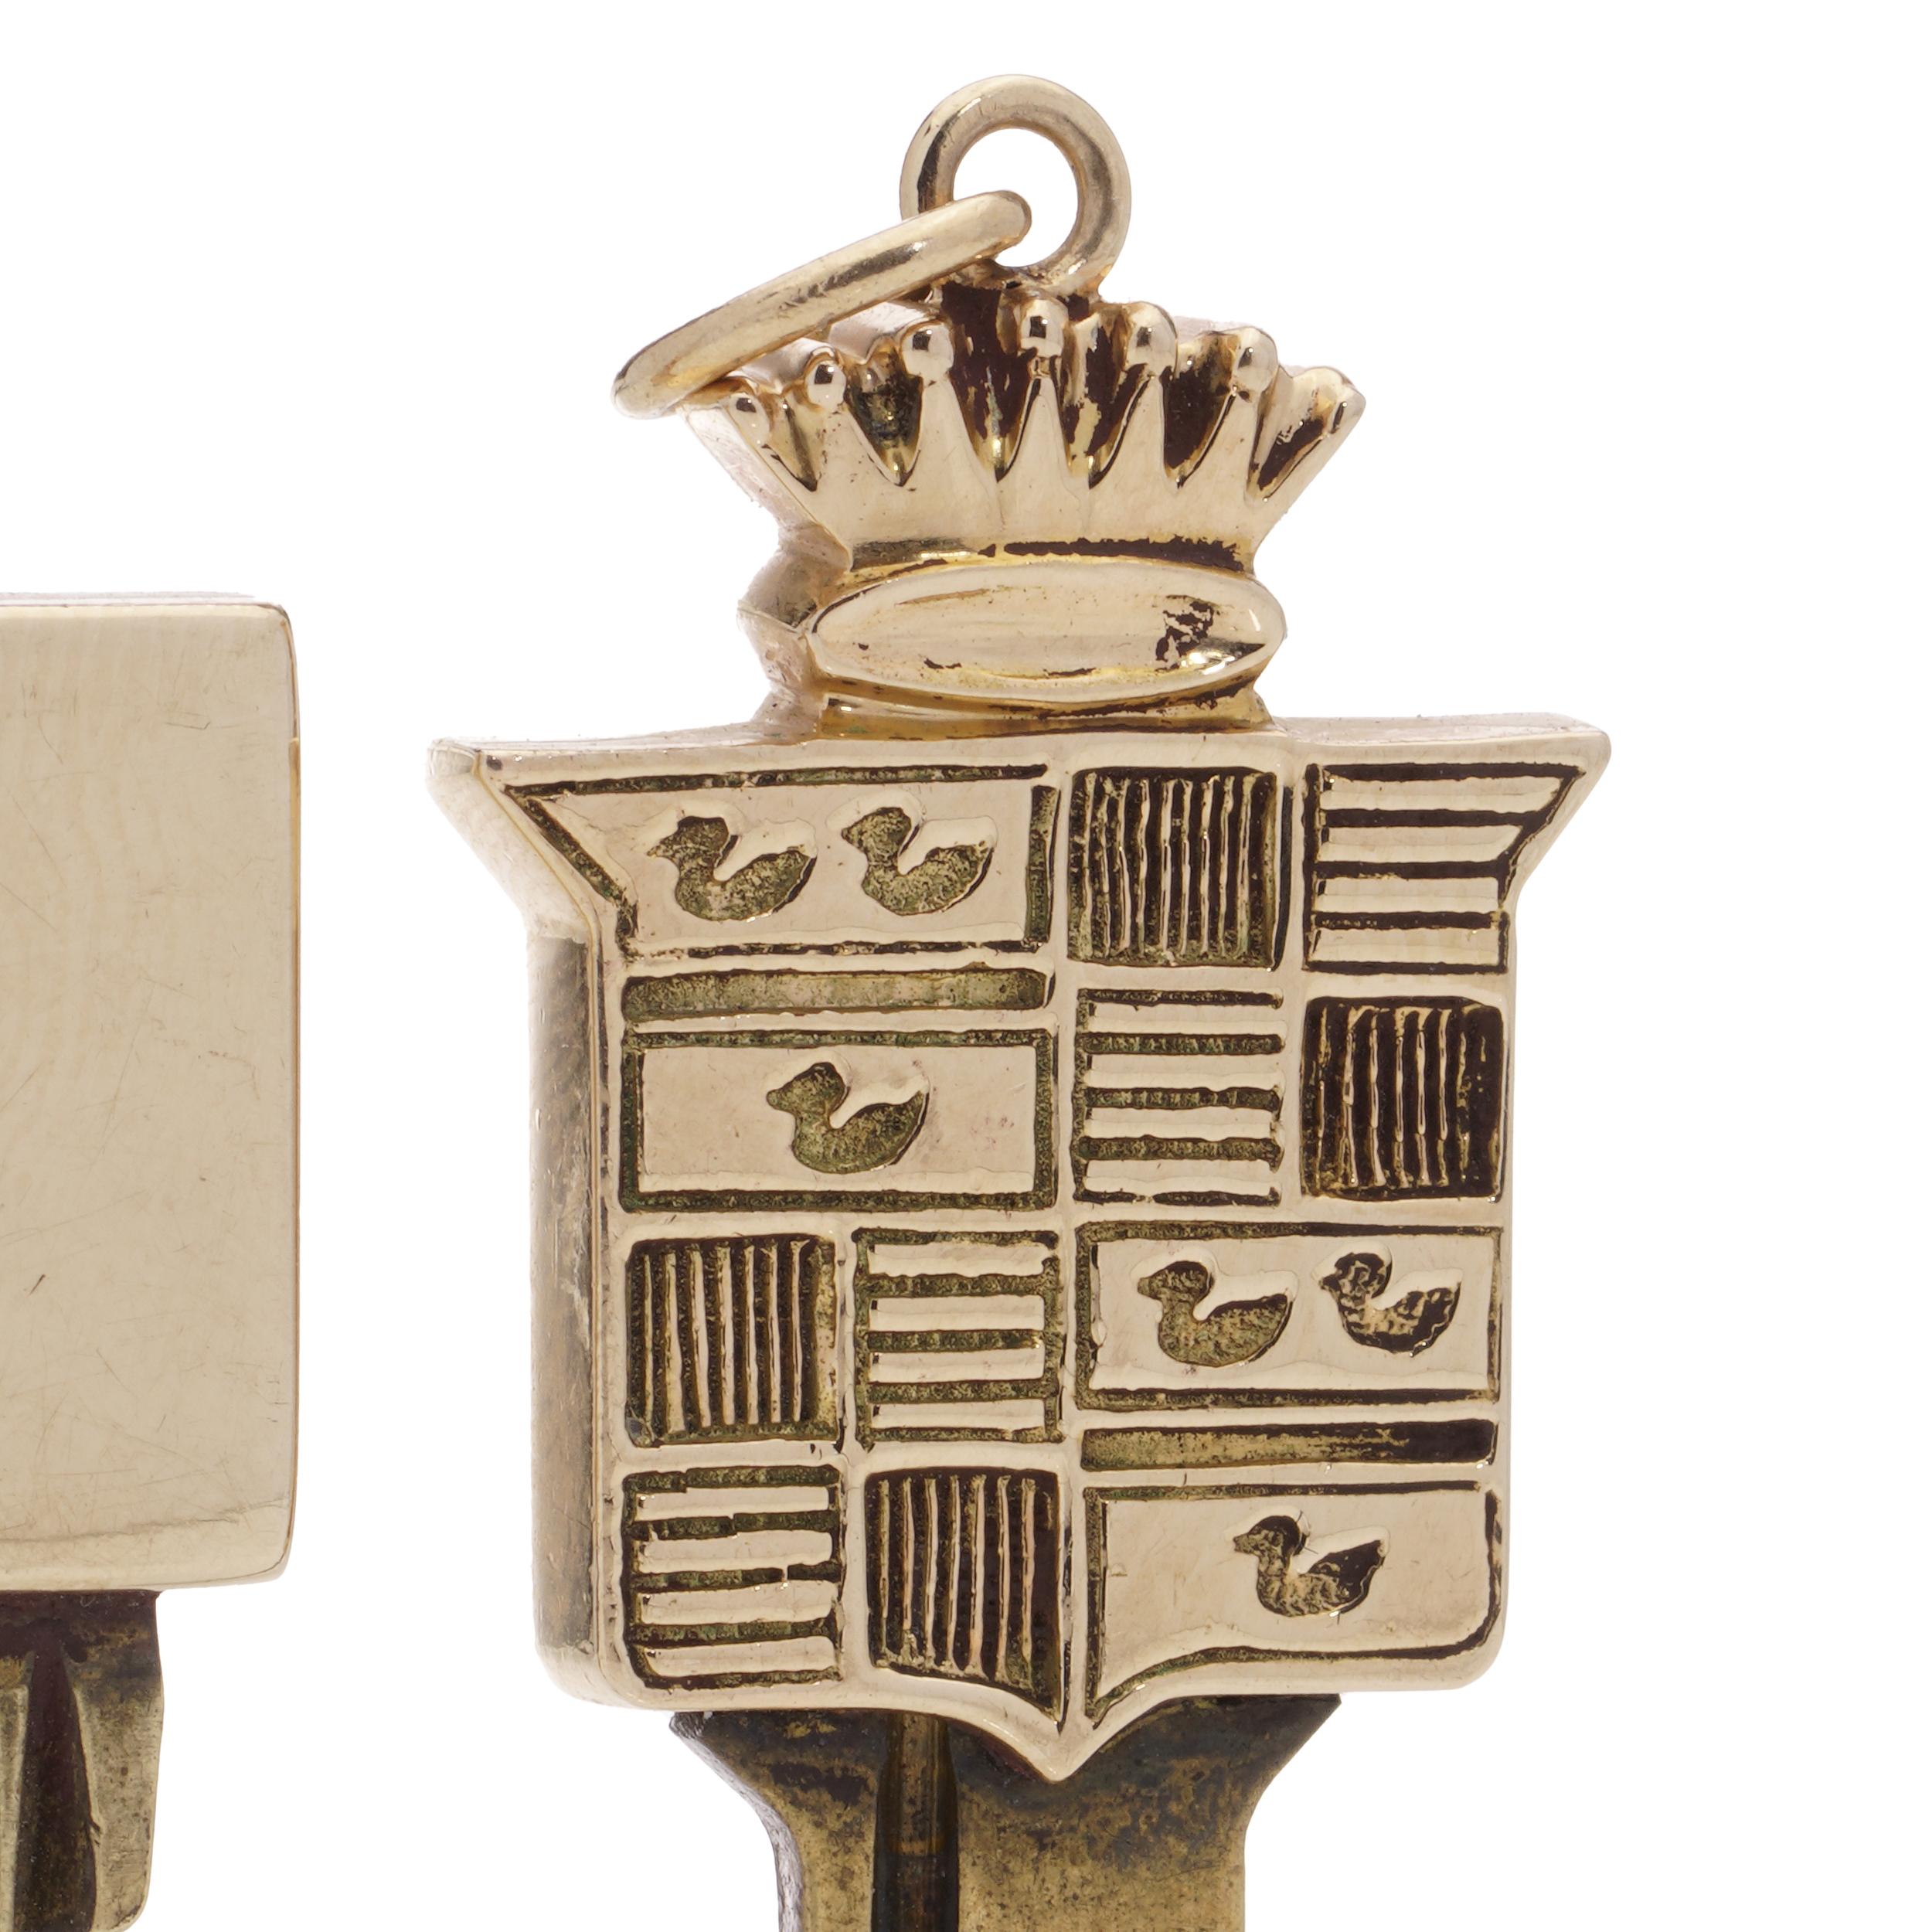 Two gold mounted keys, one with Cadillac logo design finial, Tiffany & Co. 14kt. For Sale 1